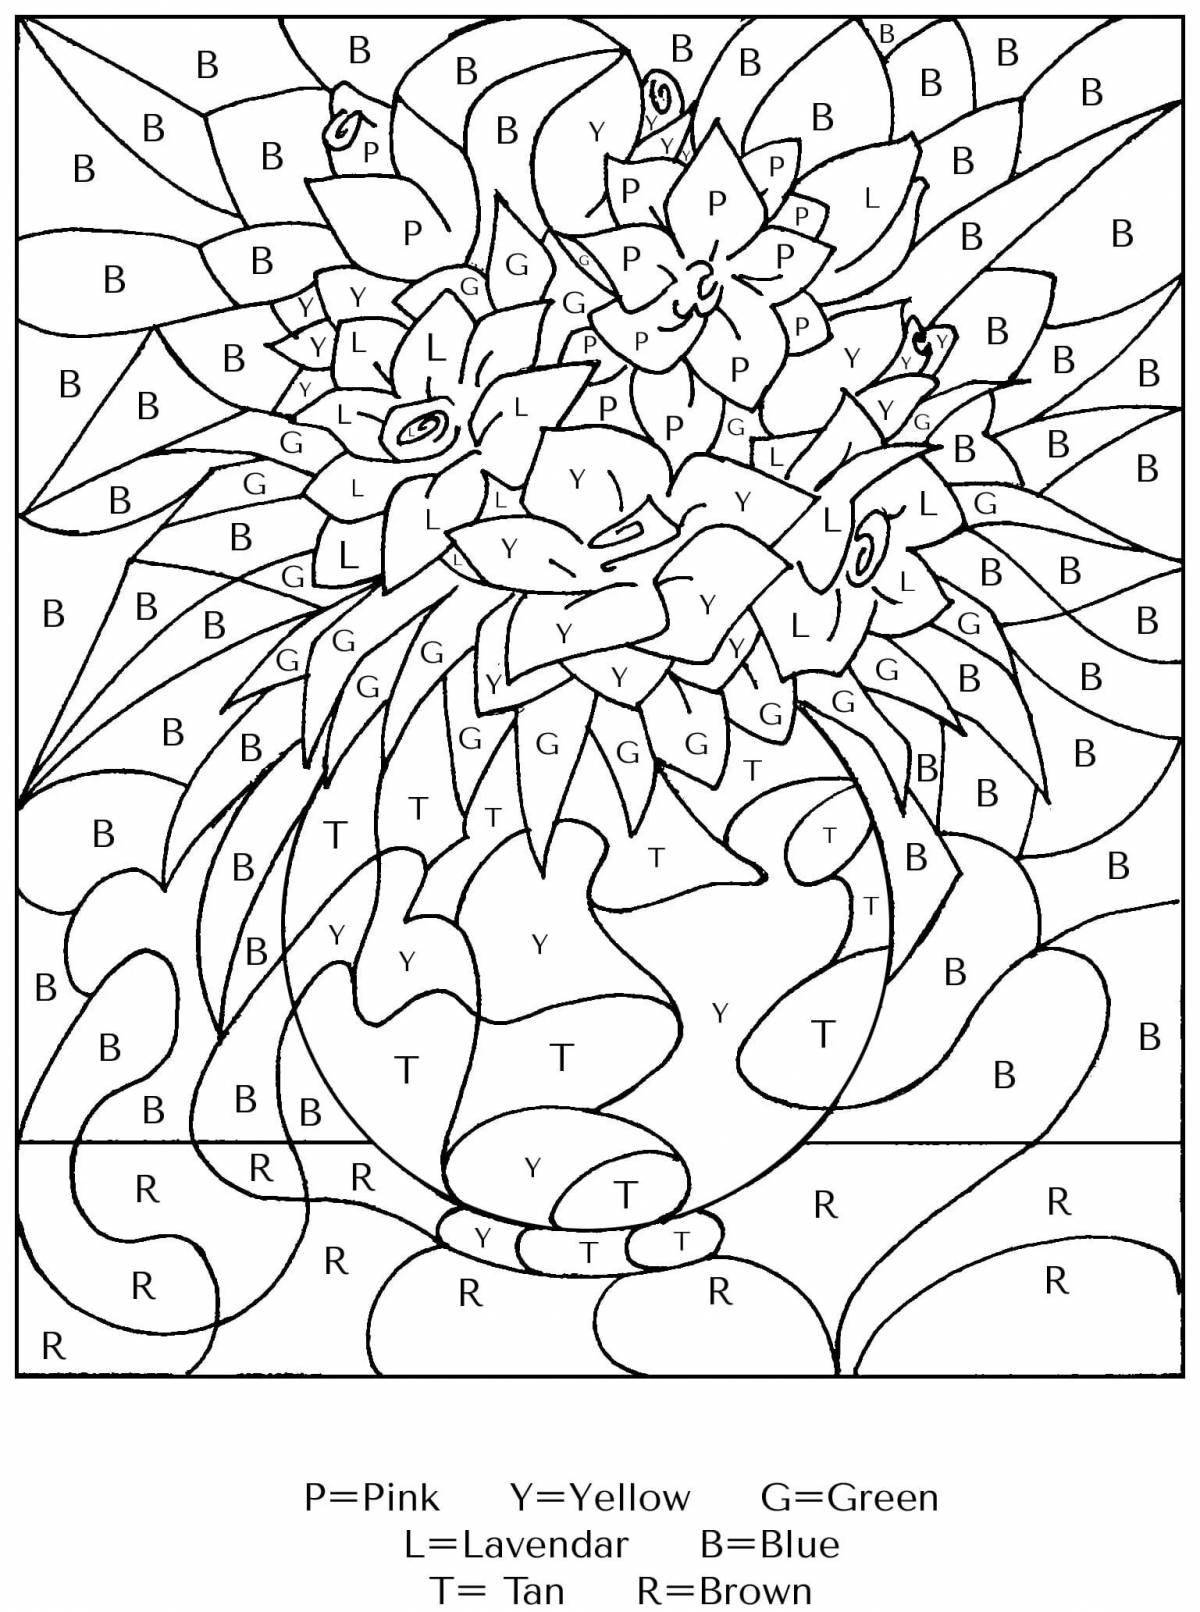 Shining colors coloring page